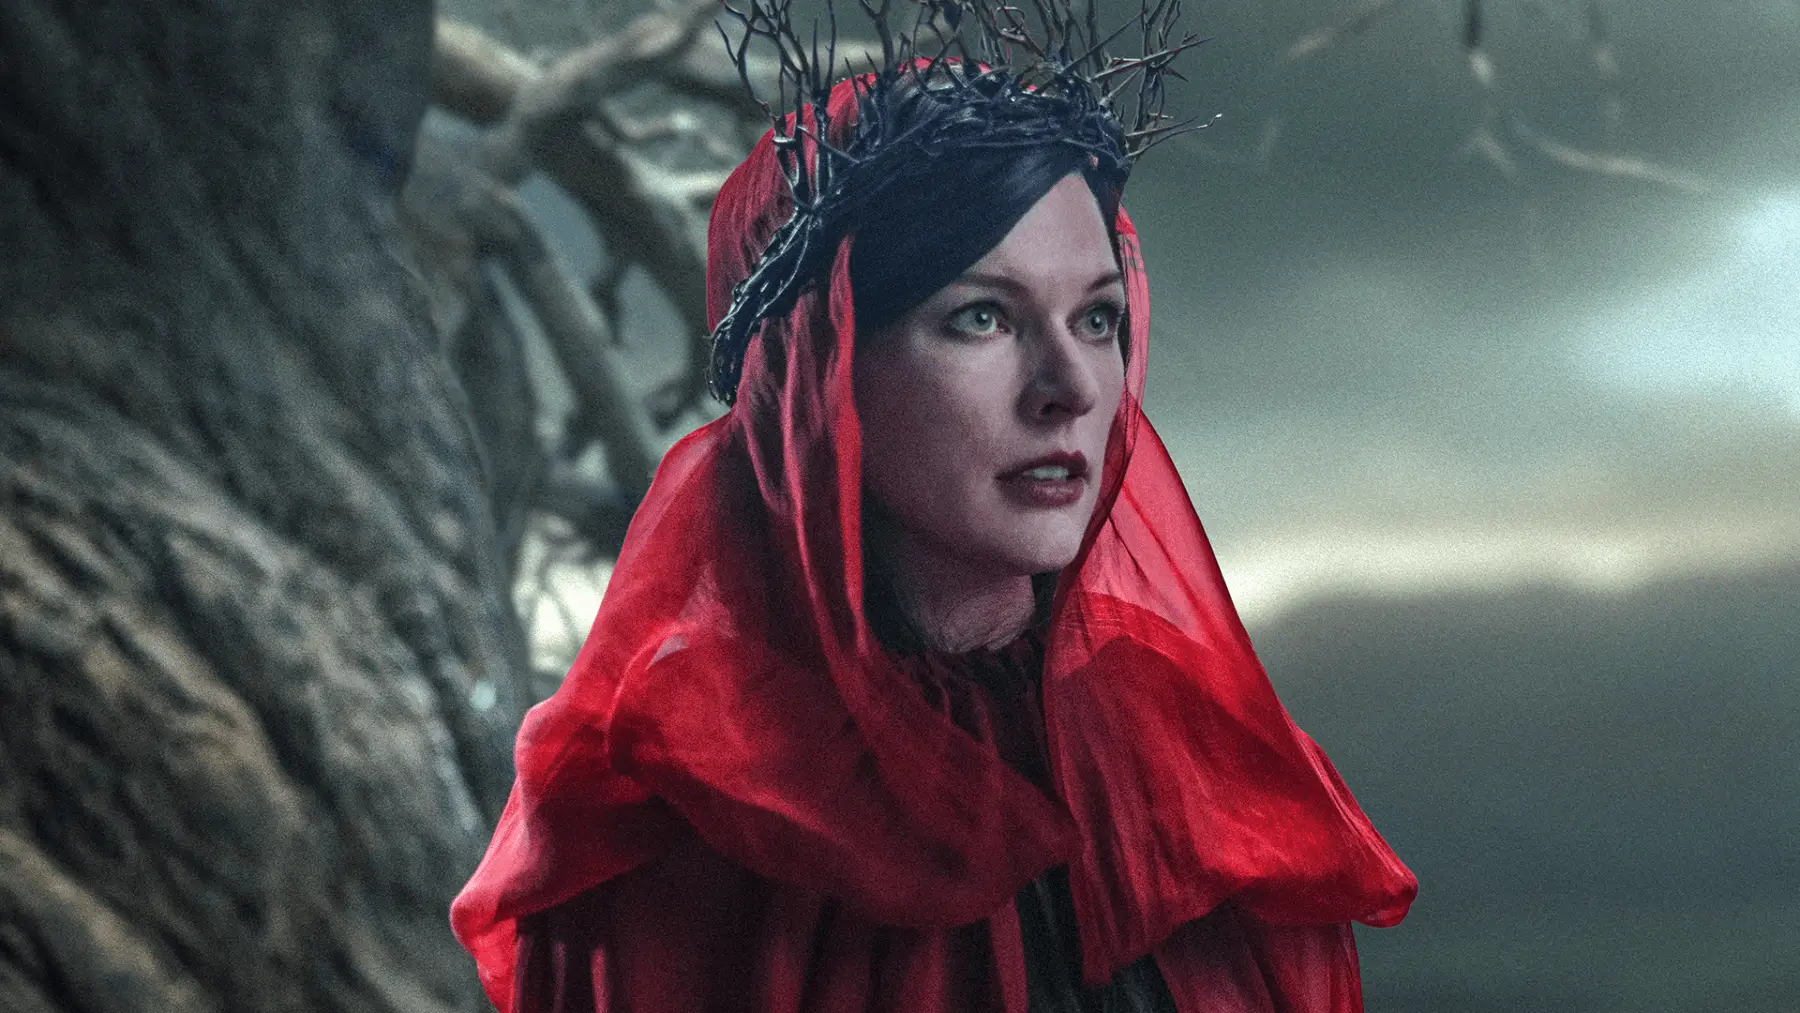 Milla Jovovich shines as the Blood Queen in Neil Marshall